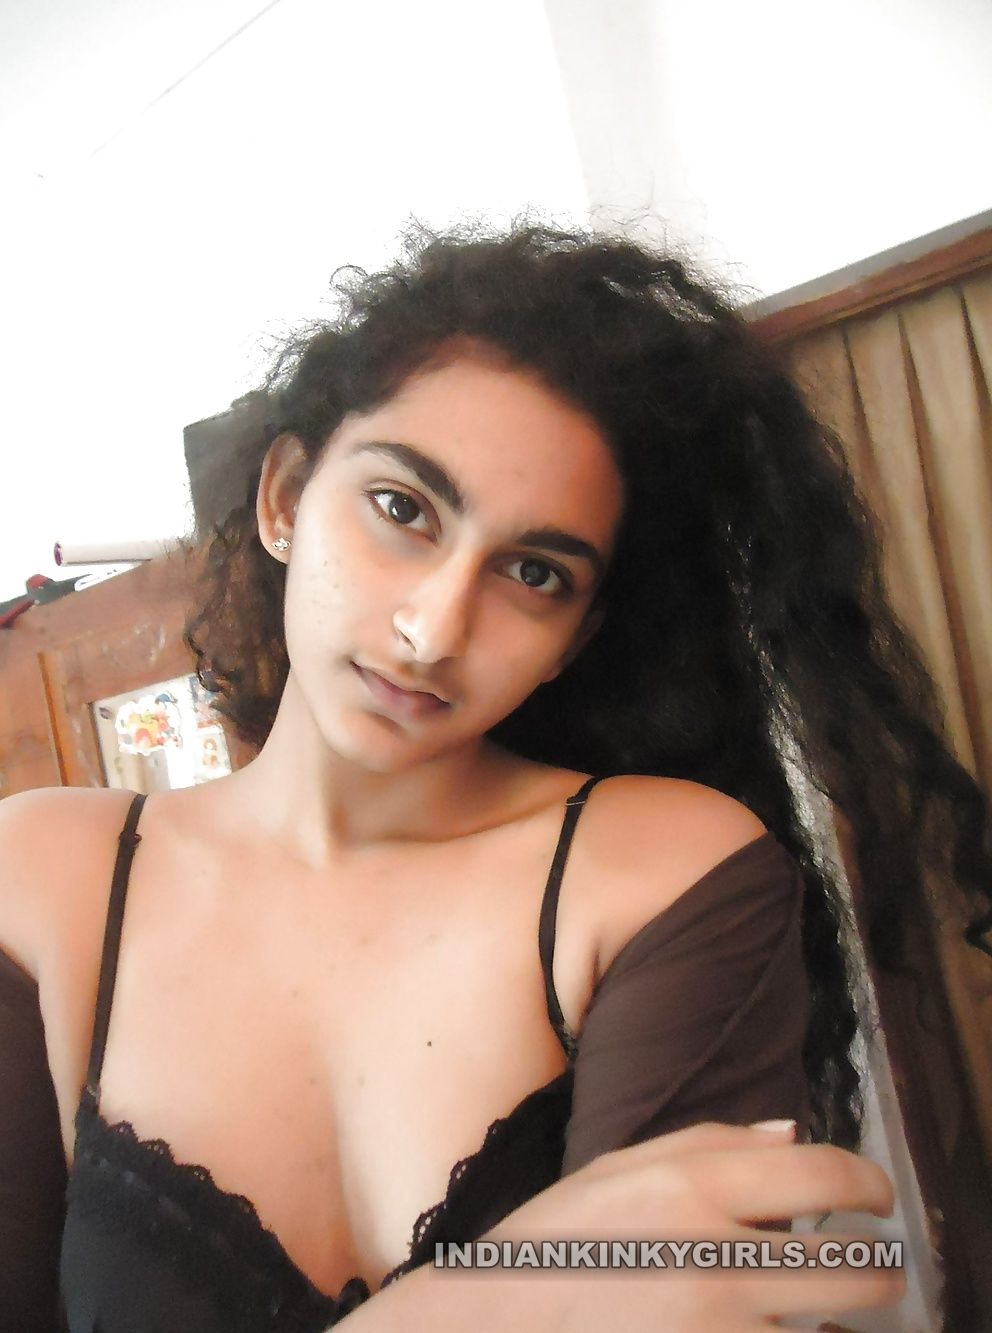 Pretty Amateur Desi Teen Sexy And Nude Selfies Indian Nude Girls image pic